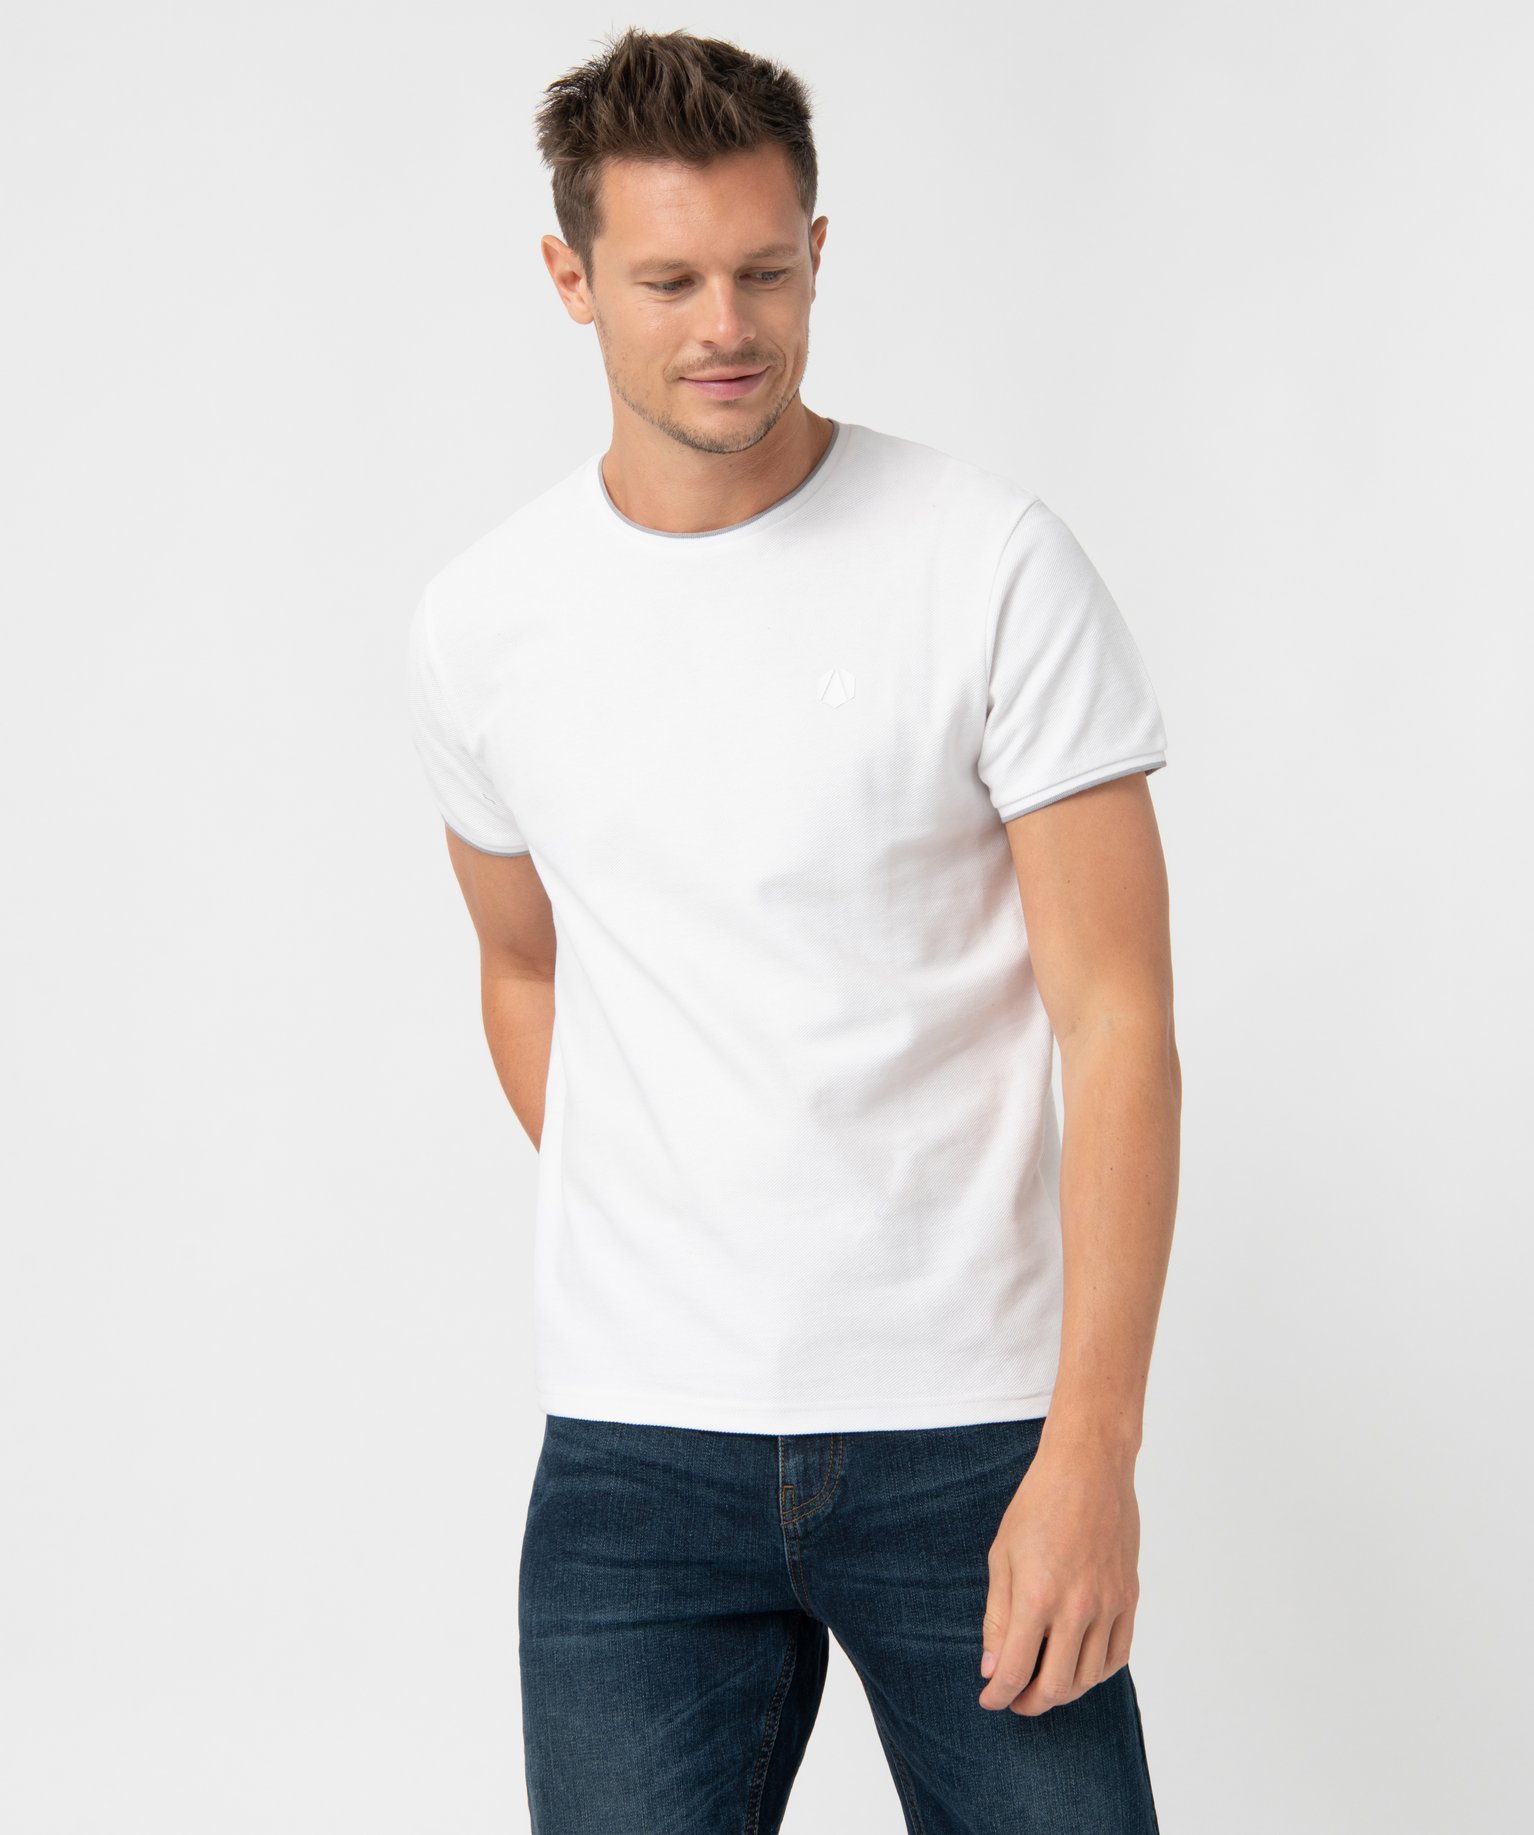 tee-shirt homme a manches courtes en maille piquee blanc tee-shirts